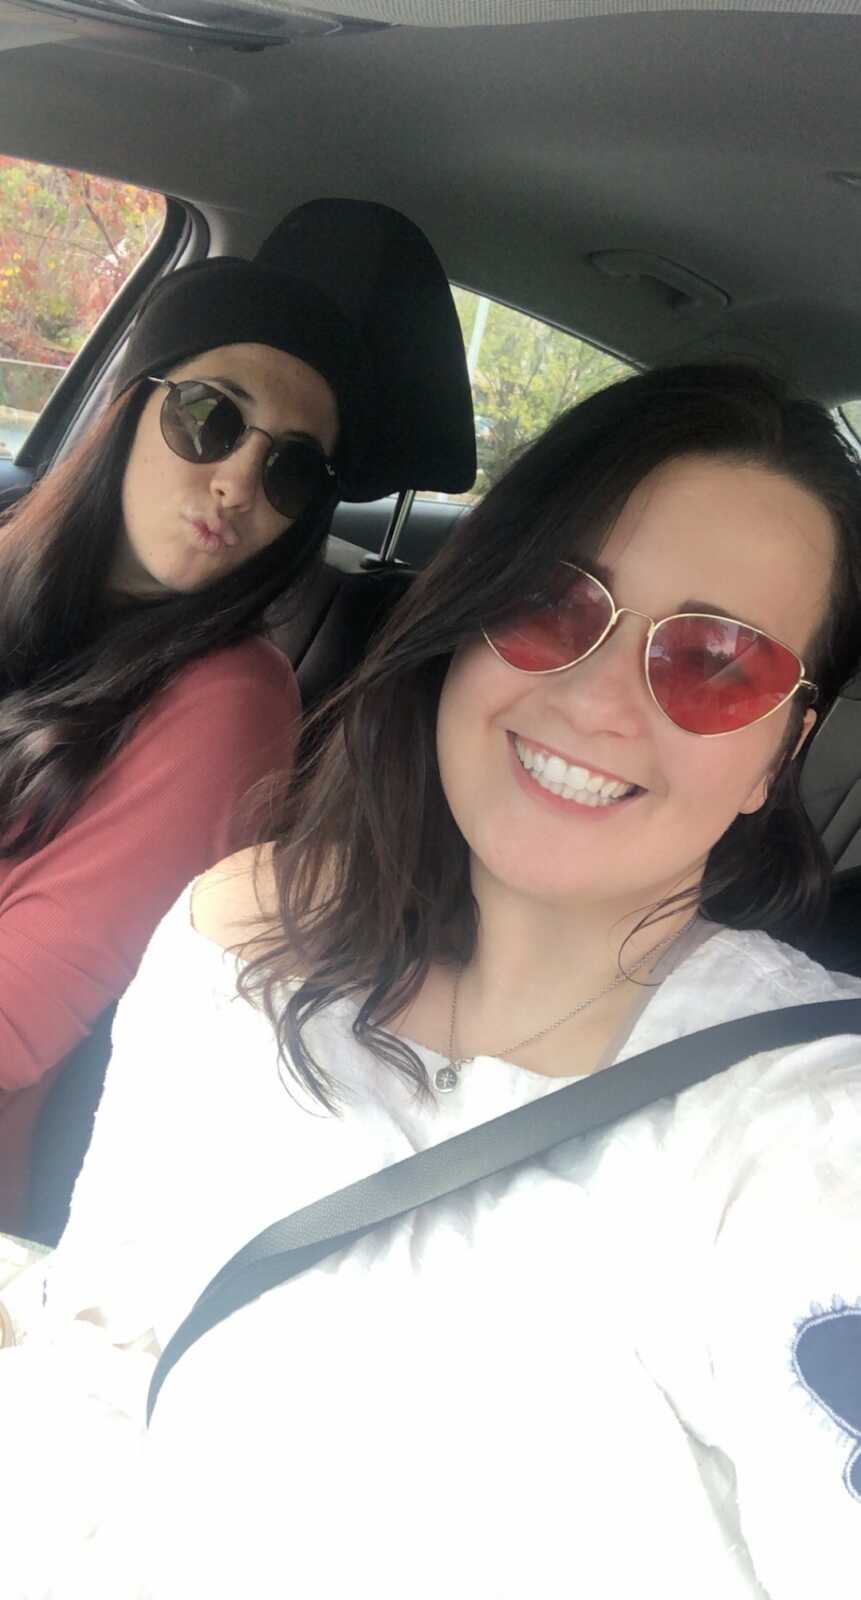 chronically ill woman takes selfie with friend